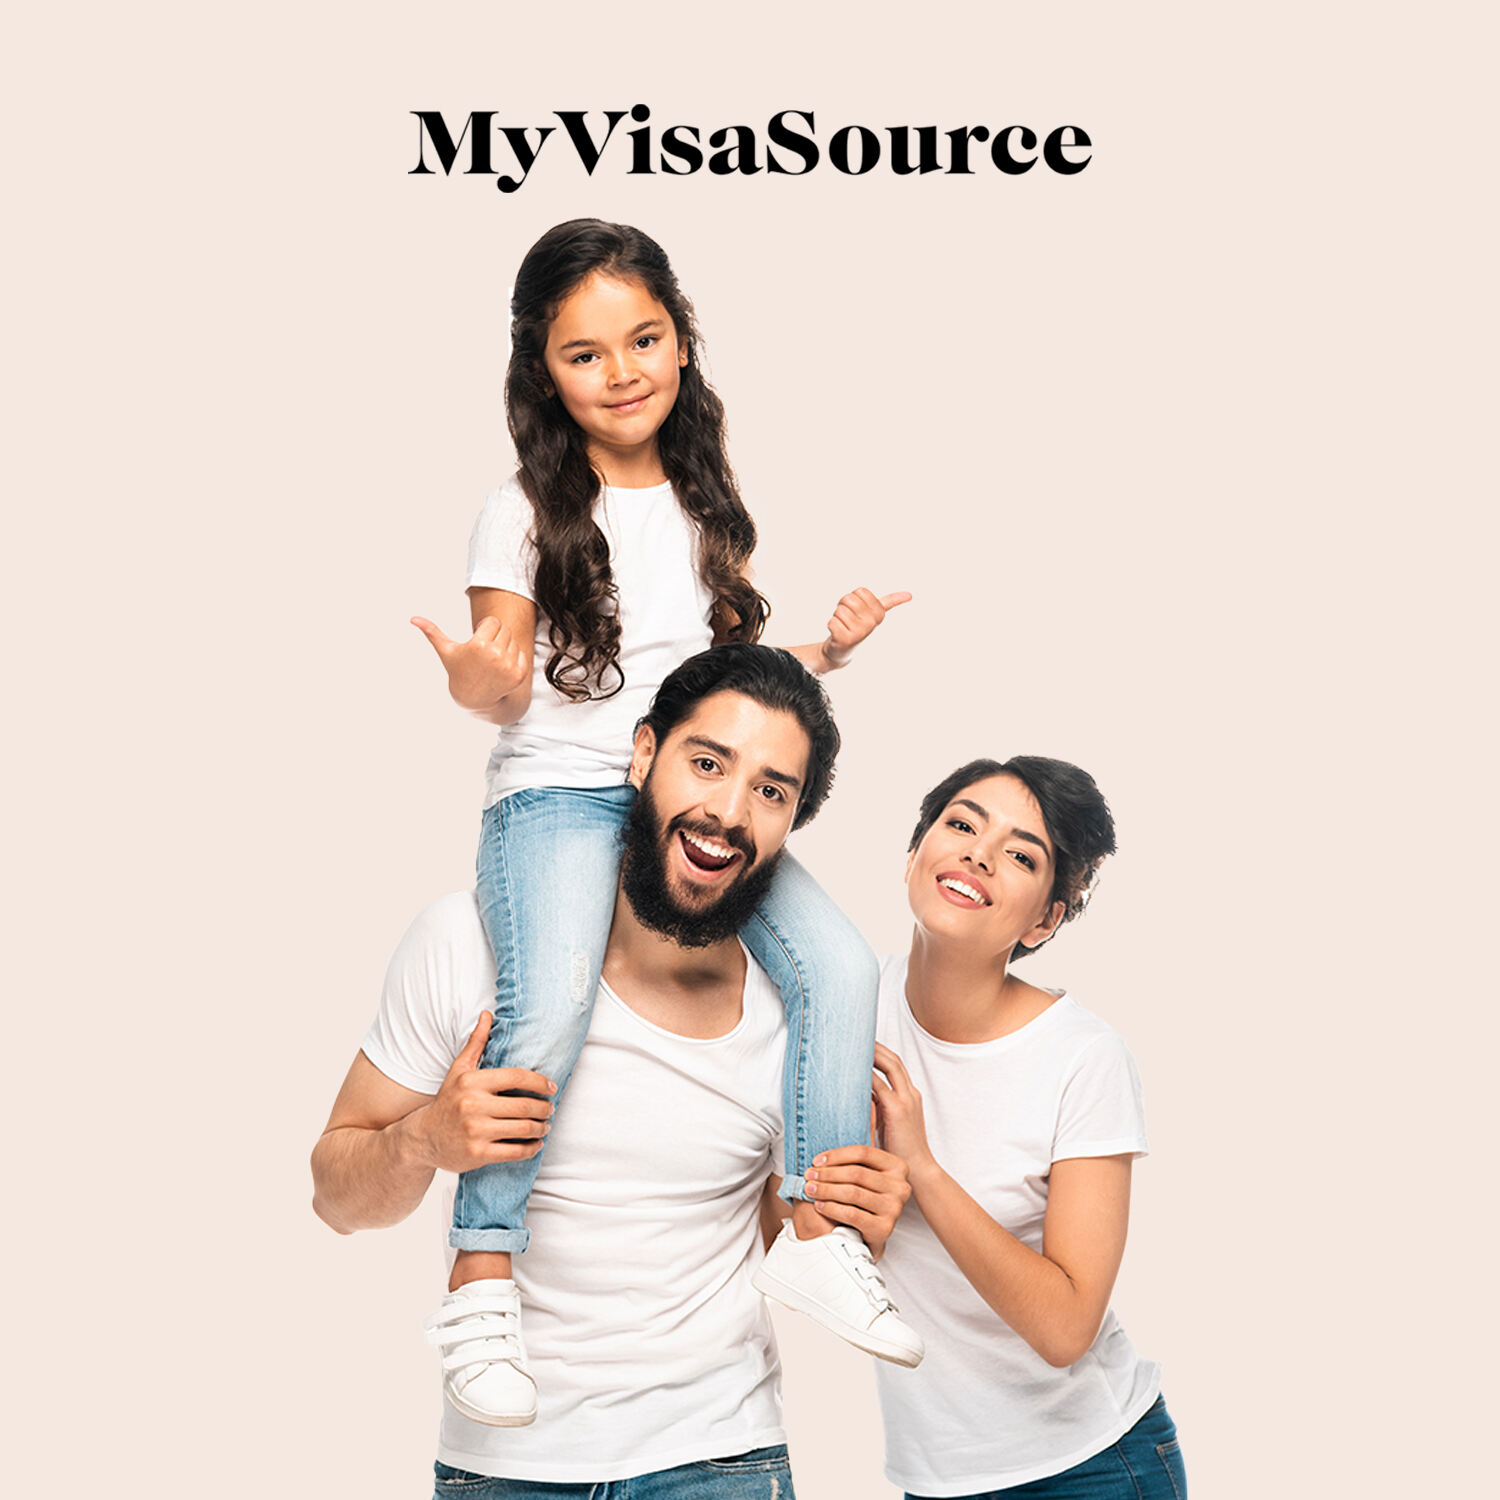 happy family with daughter on fathers shoulders wife beside my visa source